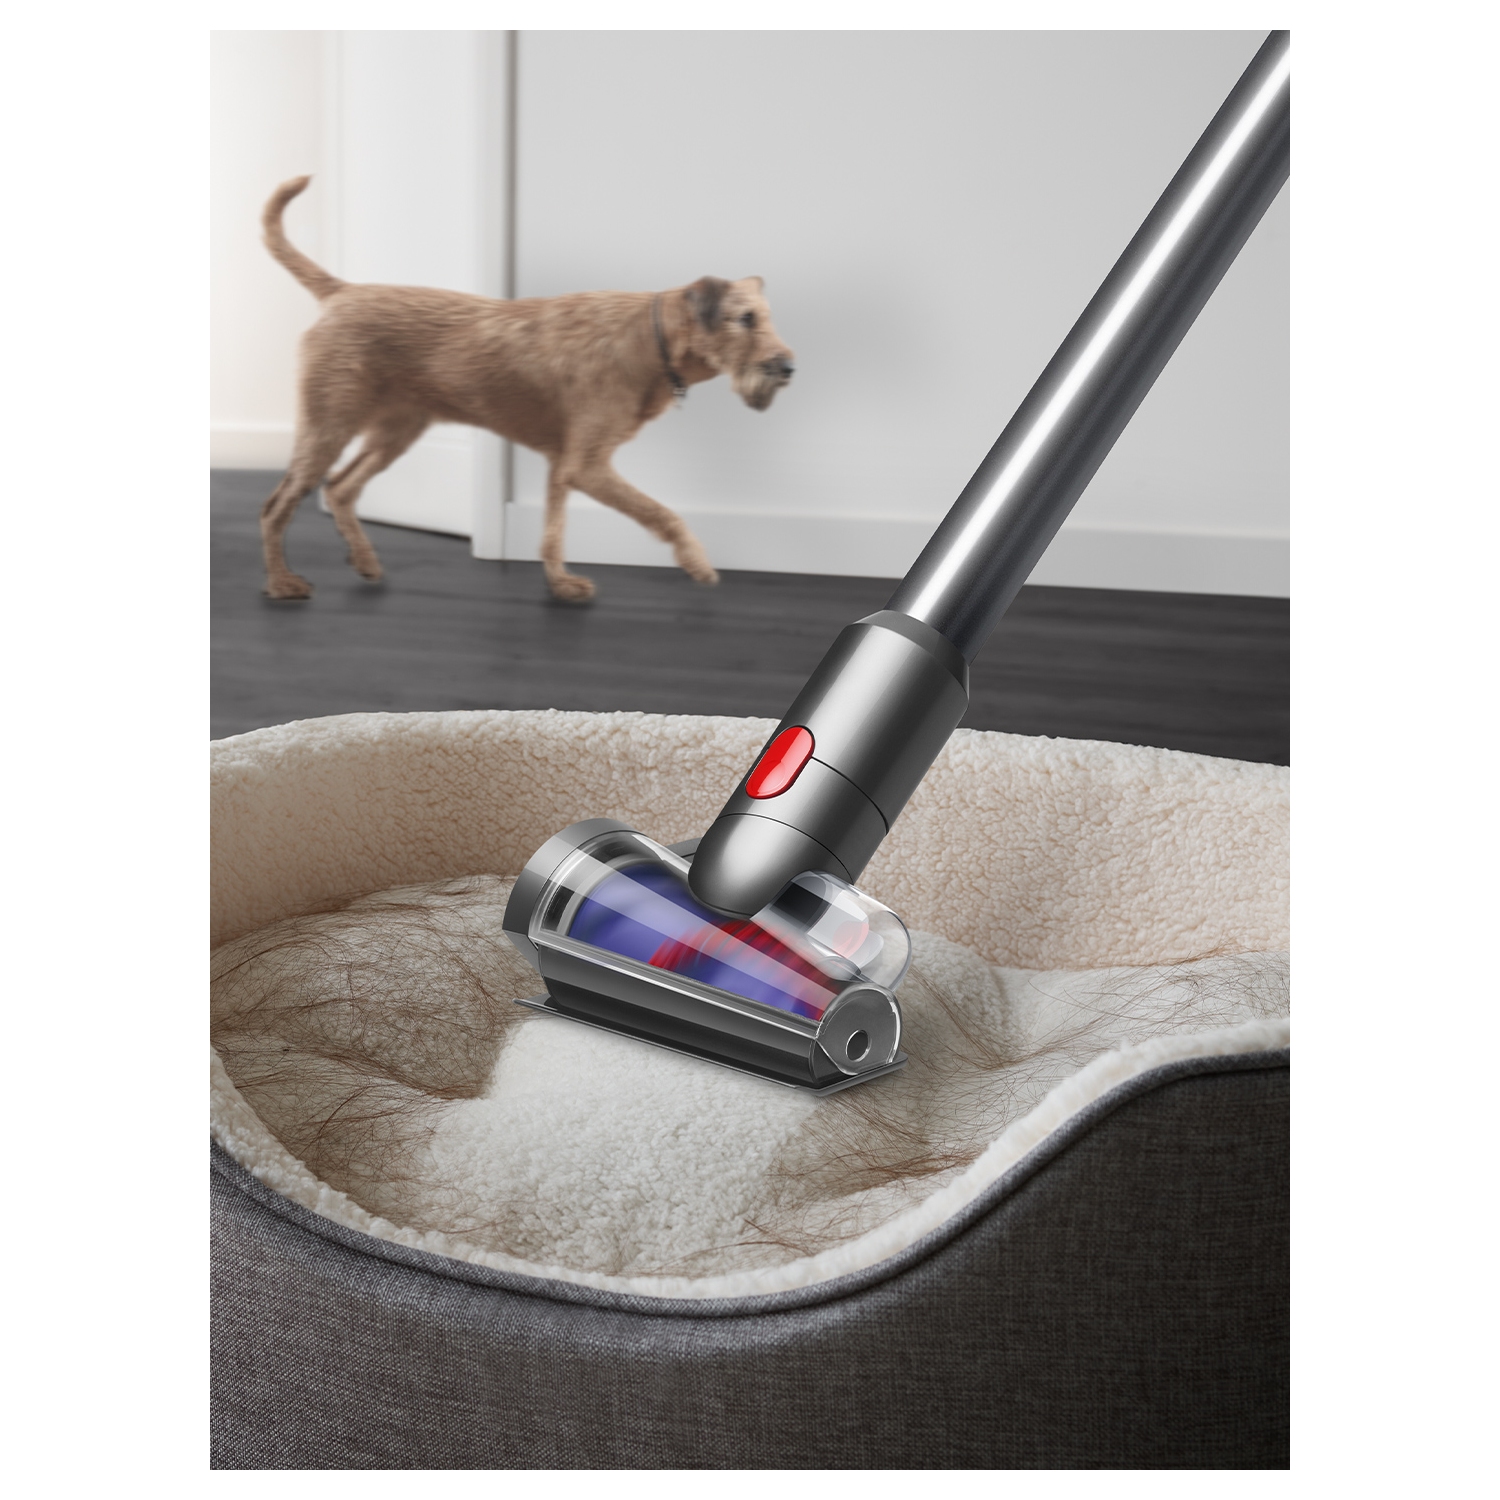 Dyson V15 Detect Absolute Cordless Stick Cleaner - 60 Minute Run Time - 4